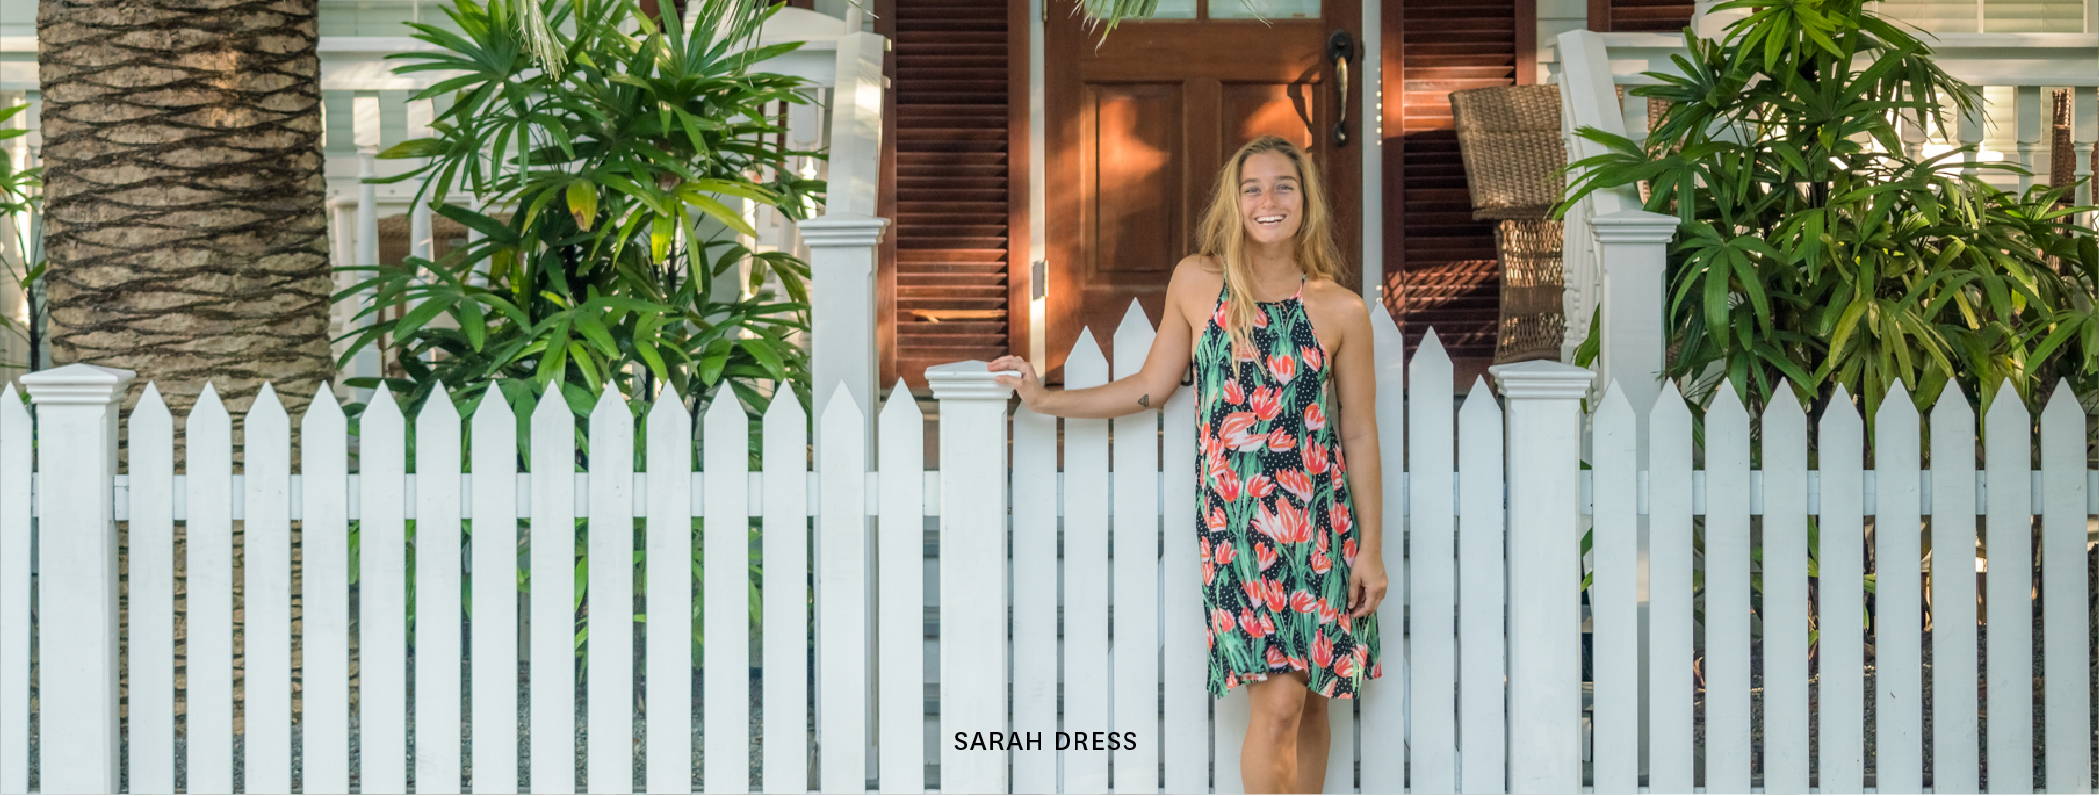 Get the SARAH dress in our NIRVANA print!